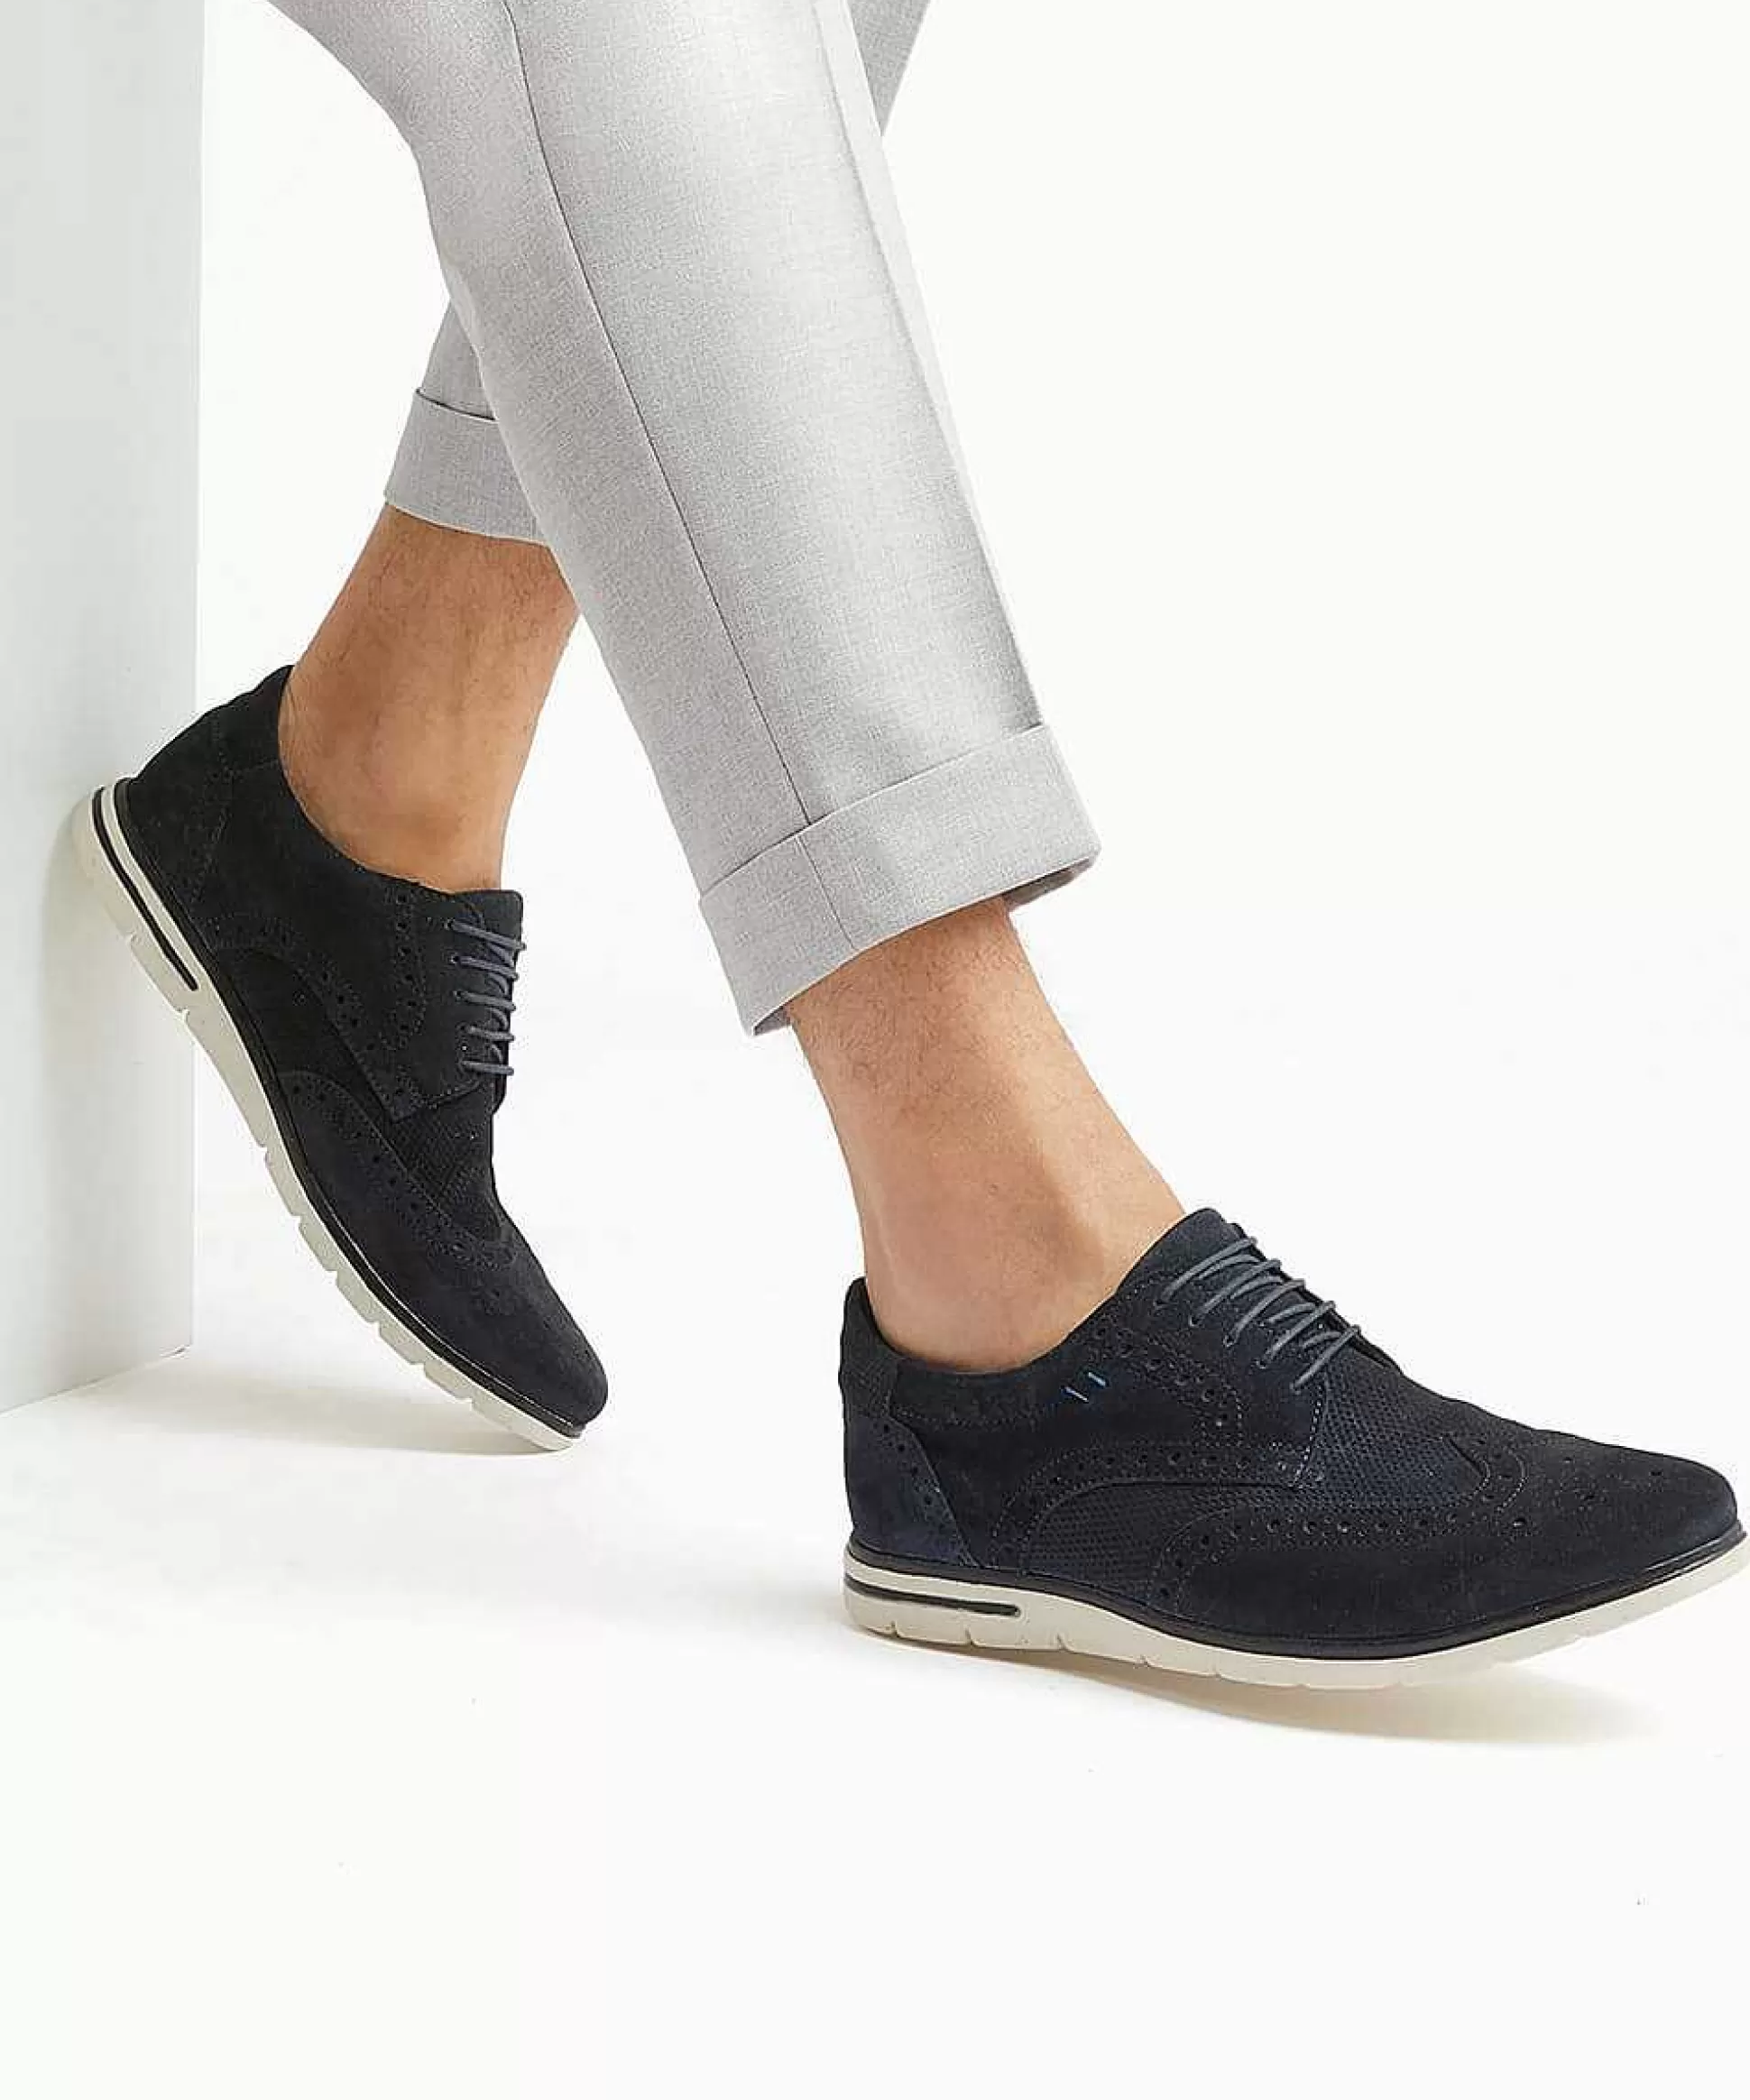 Dune London BARRY - NAVY-Men Casual Shoes | Brogues